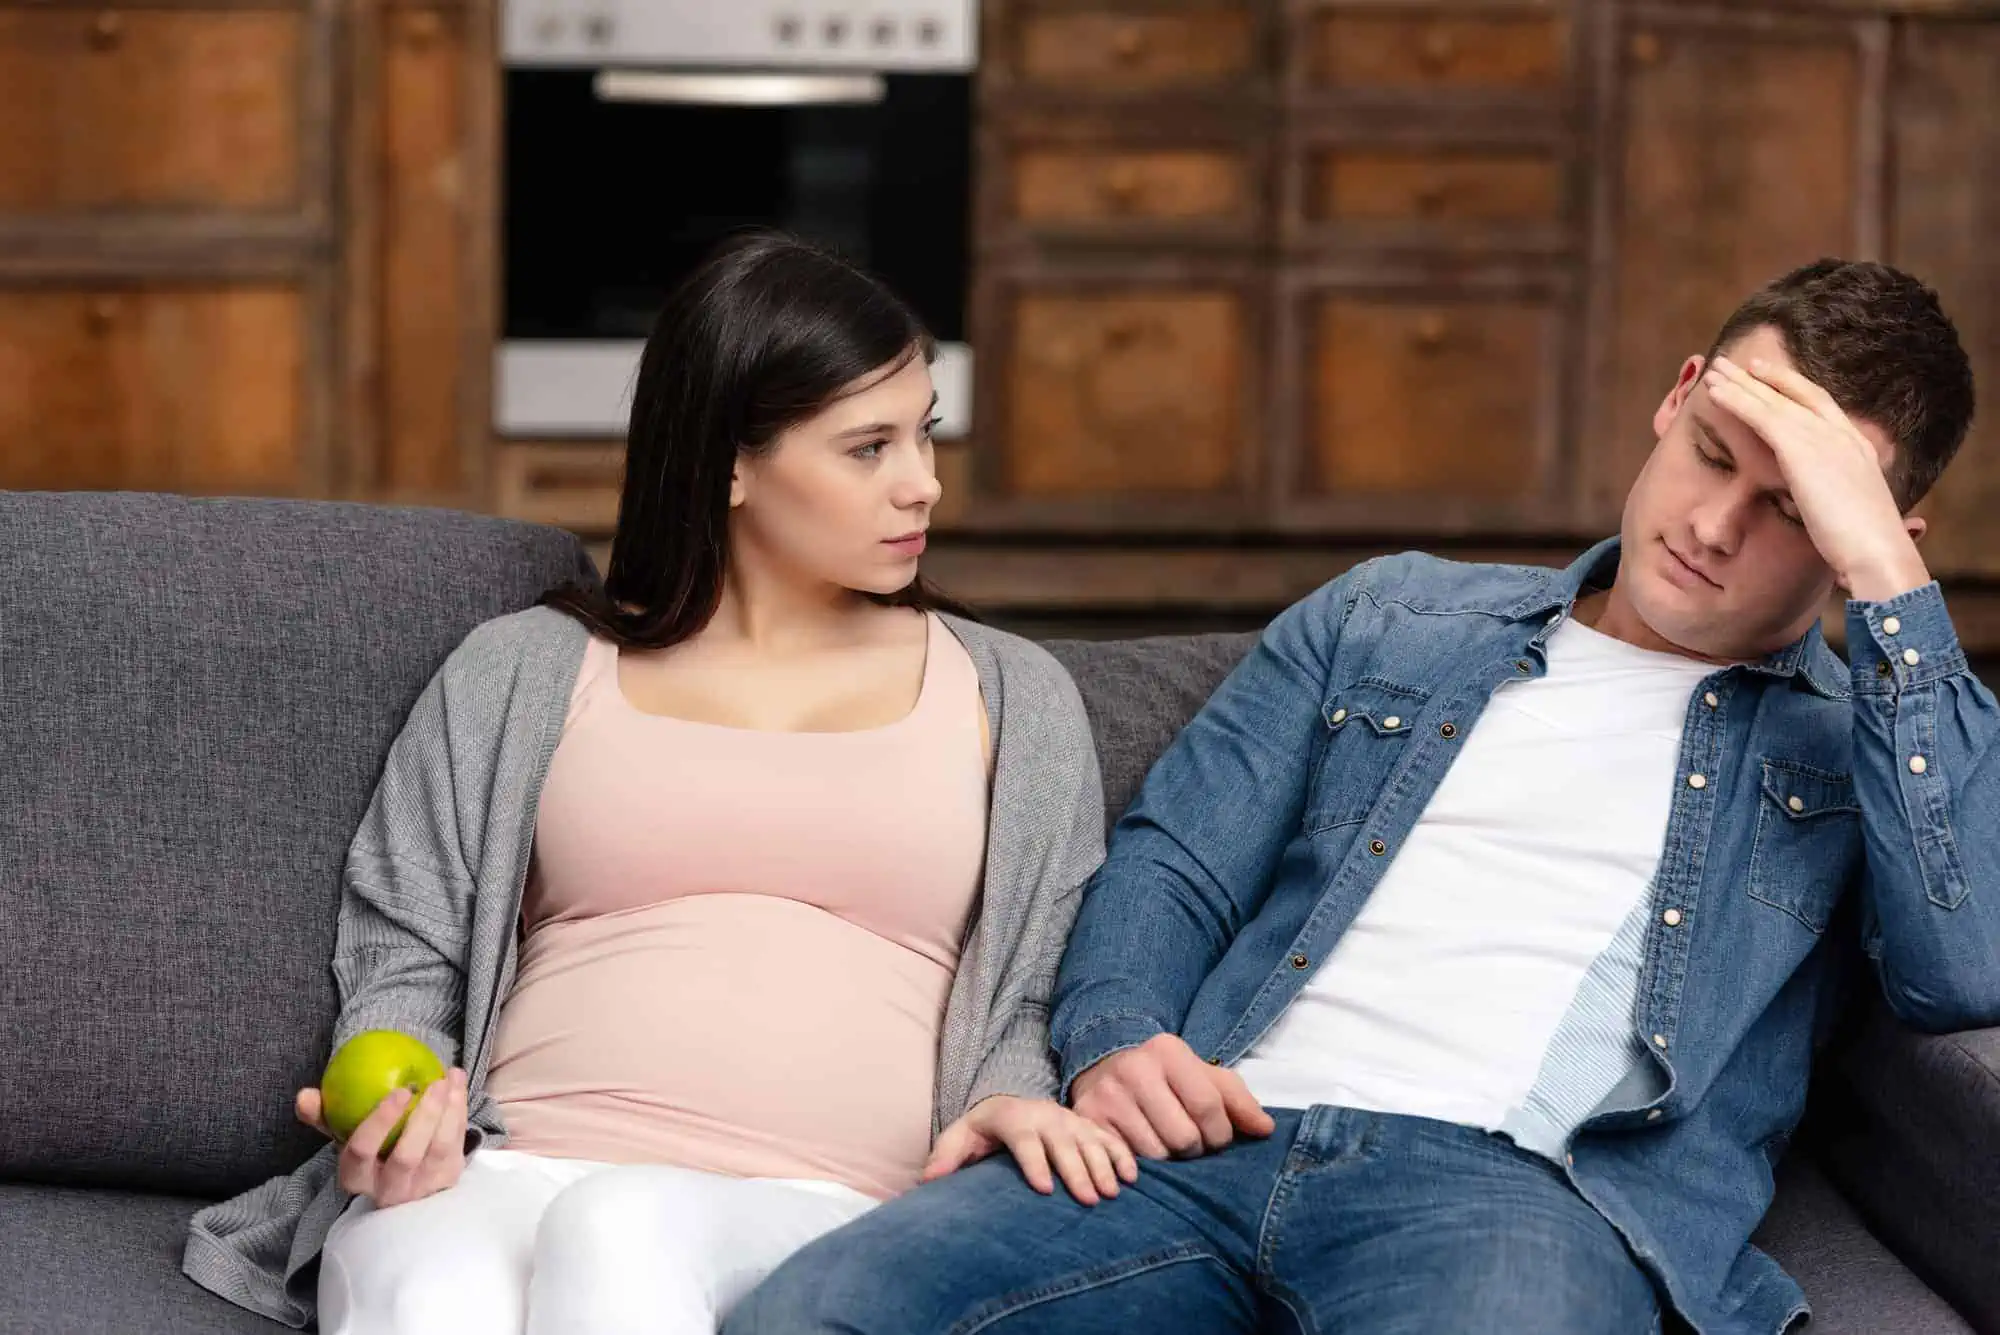 A pregnant woman sitting on a couch next to a man